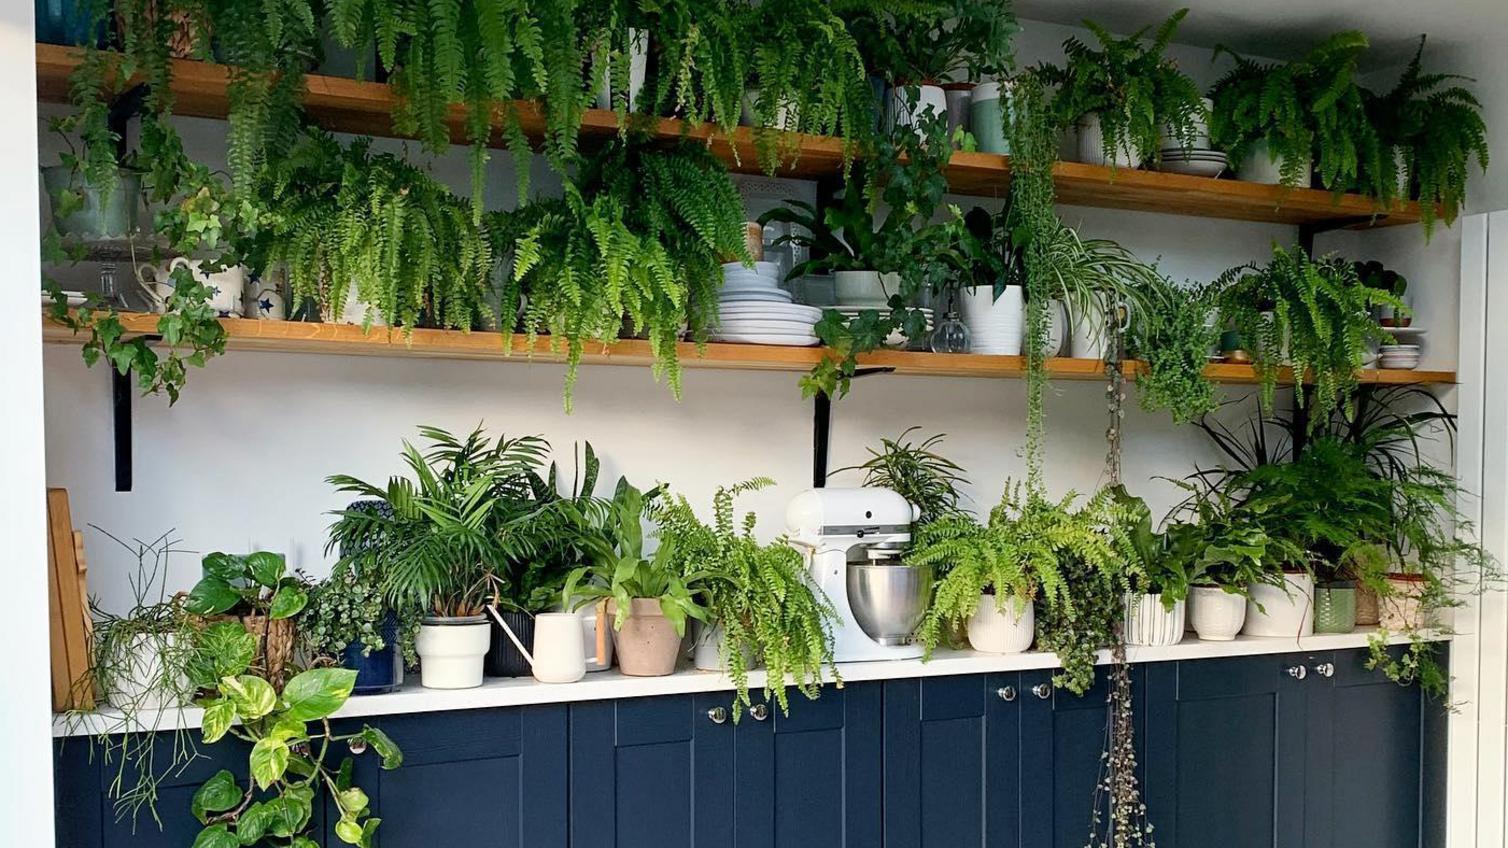 Boot room idea with blue shaker kitchen doors, white worktops, and wooden open shelving with plants.